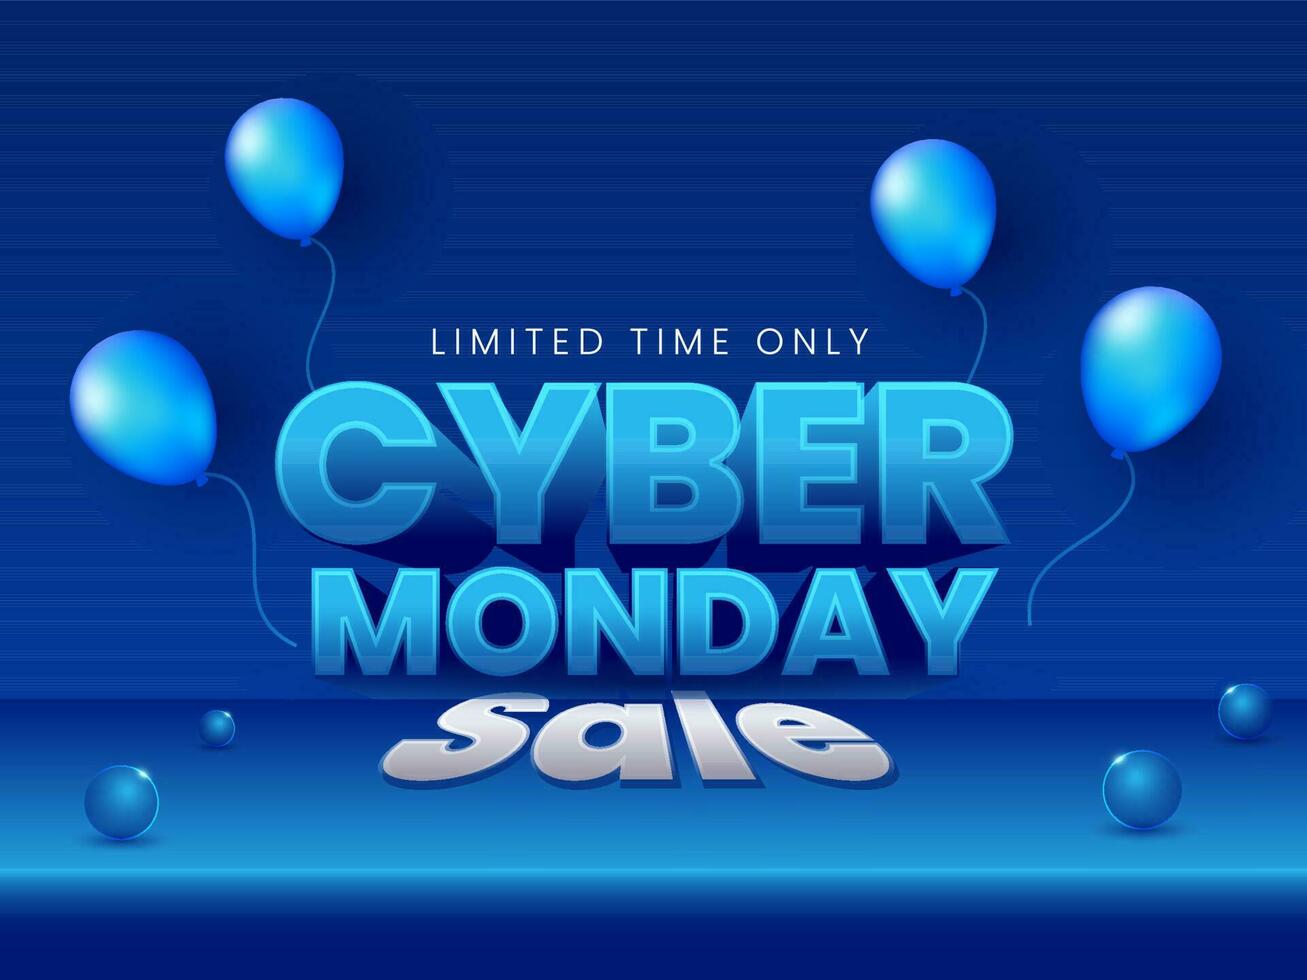 Sale Poster Or Banner Design With 3D Cyber Monday Text, Balls And Balloons On Blue Background. vector